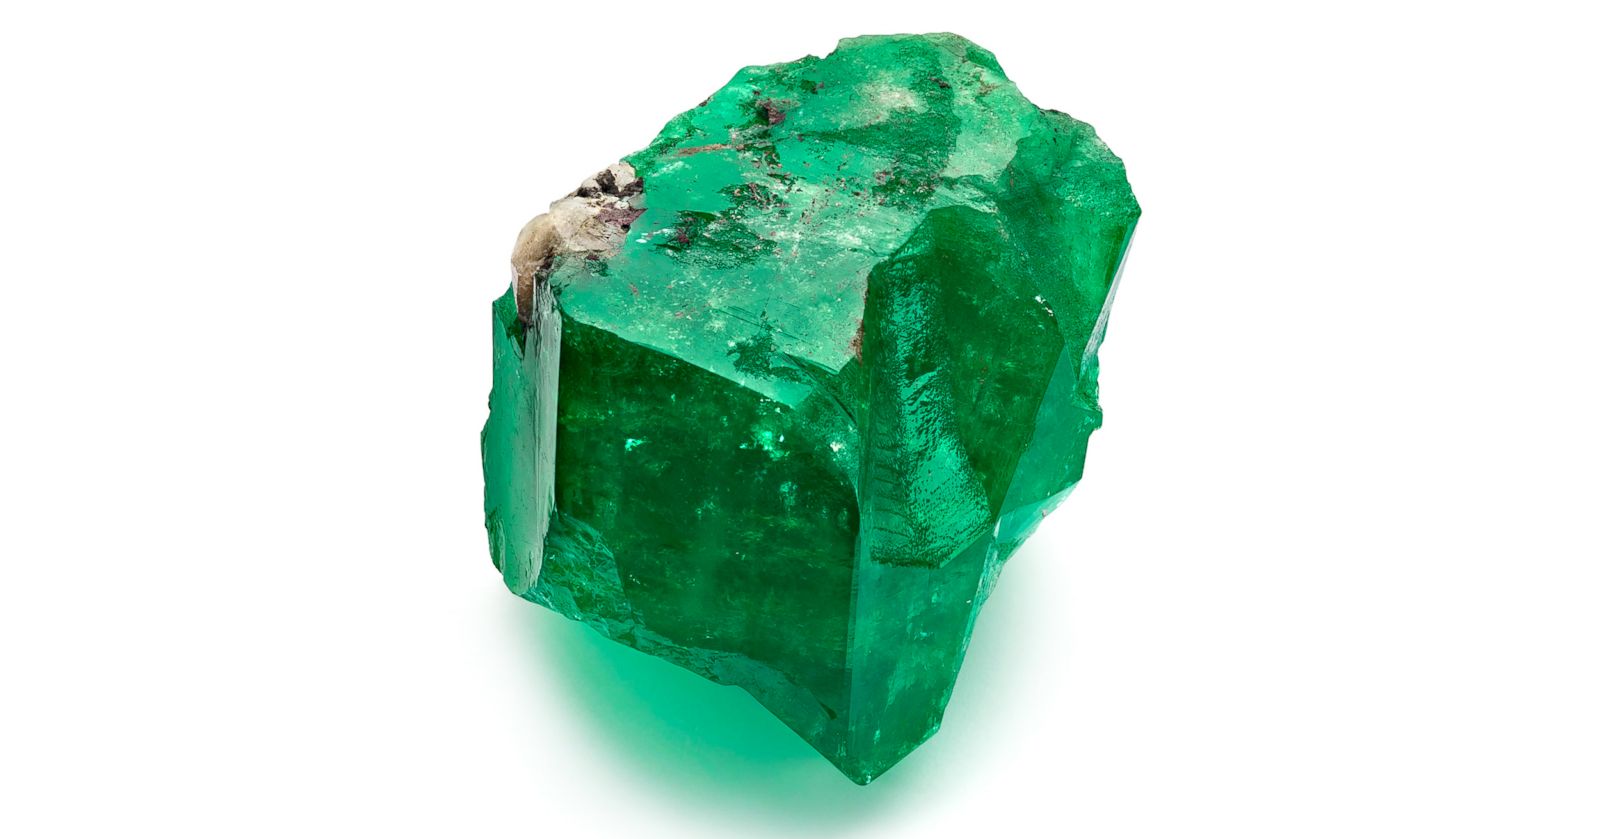 Emerald pictures